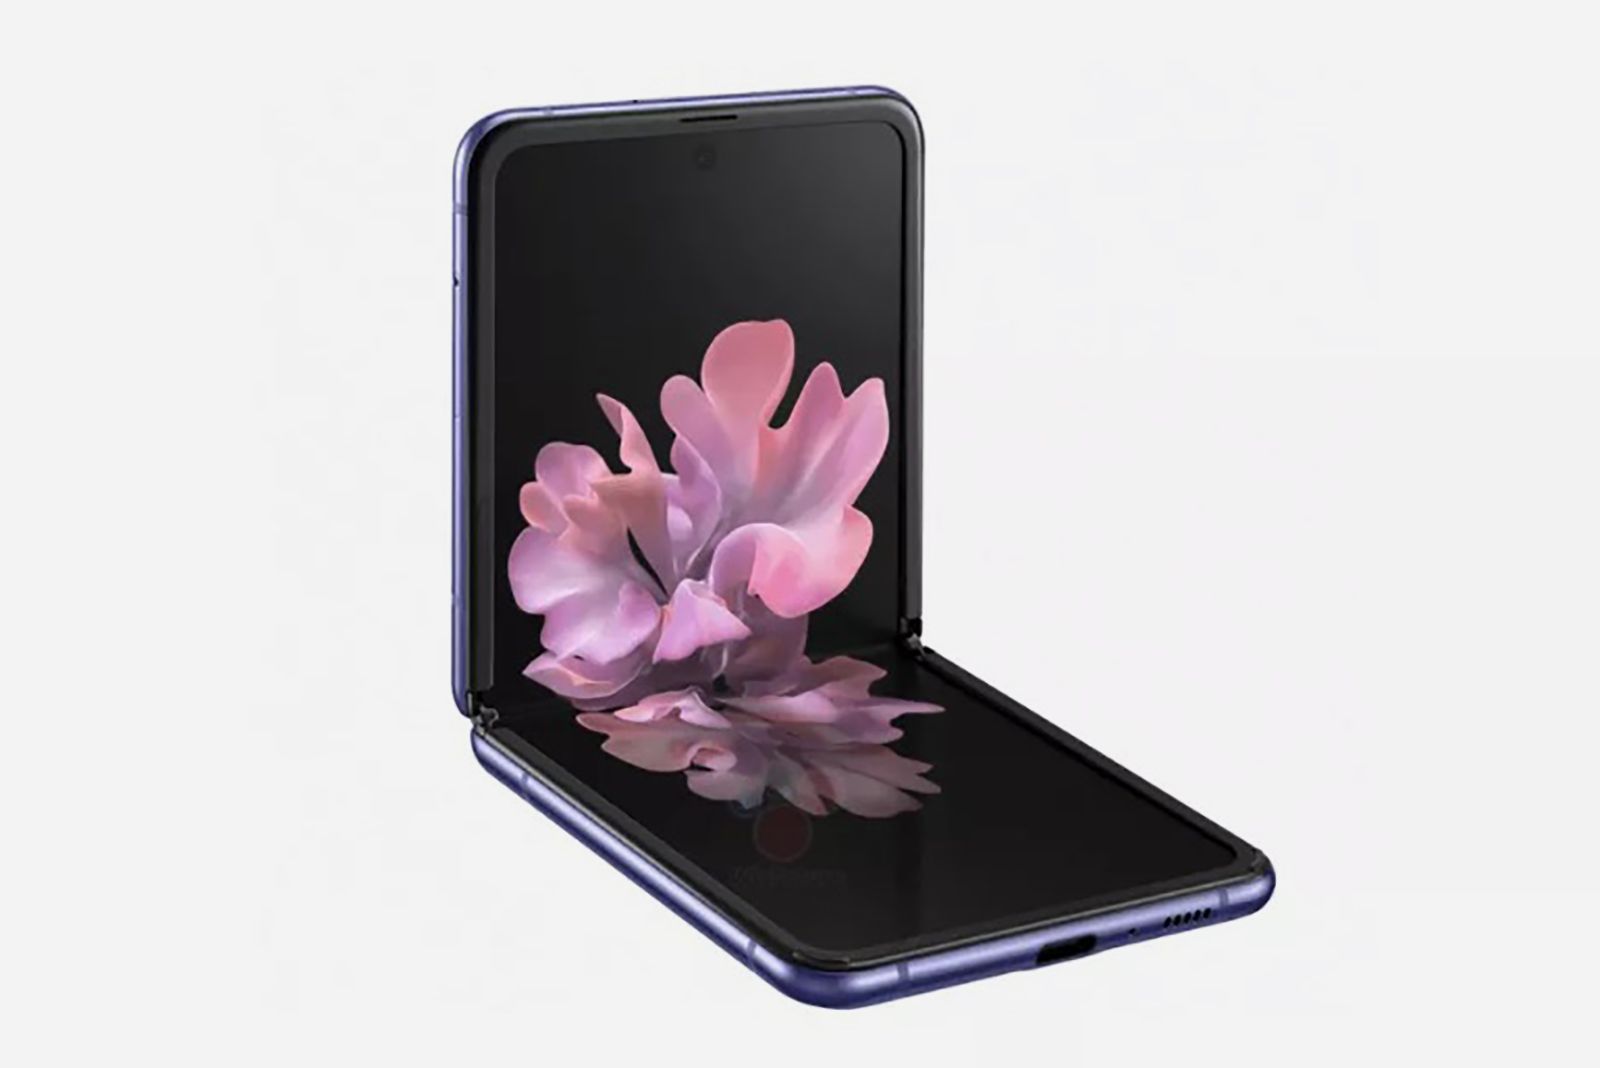 This is what the Samsung Galaxy Z Flip foldable looks like and features image 2